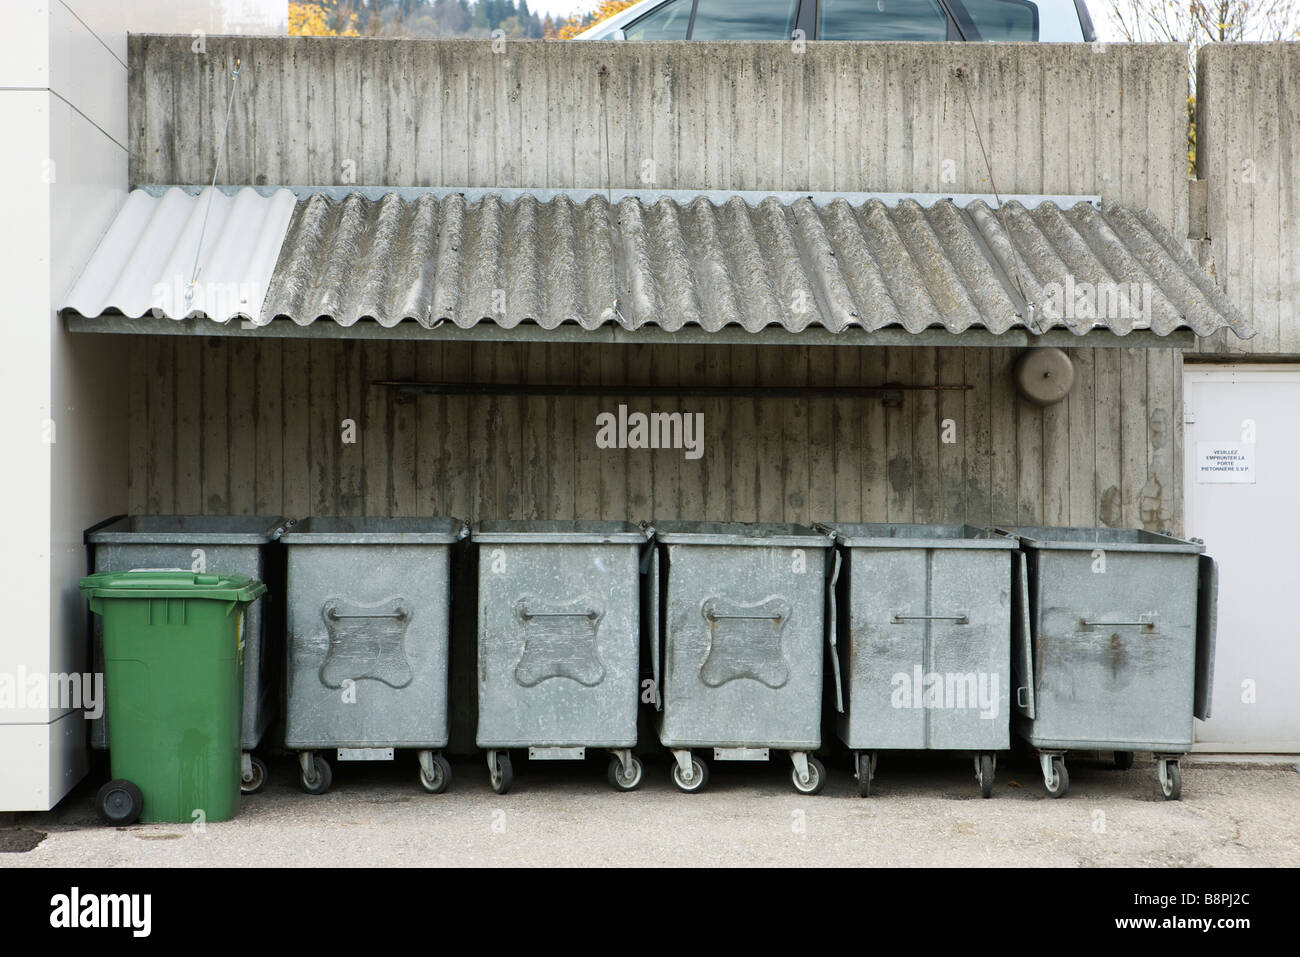 Trash bins lined up under awning Stock Photo